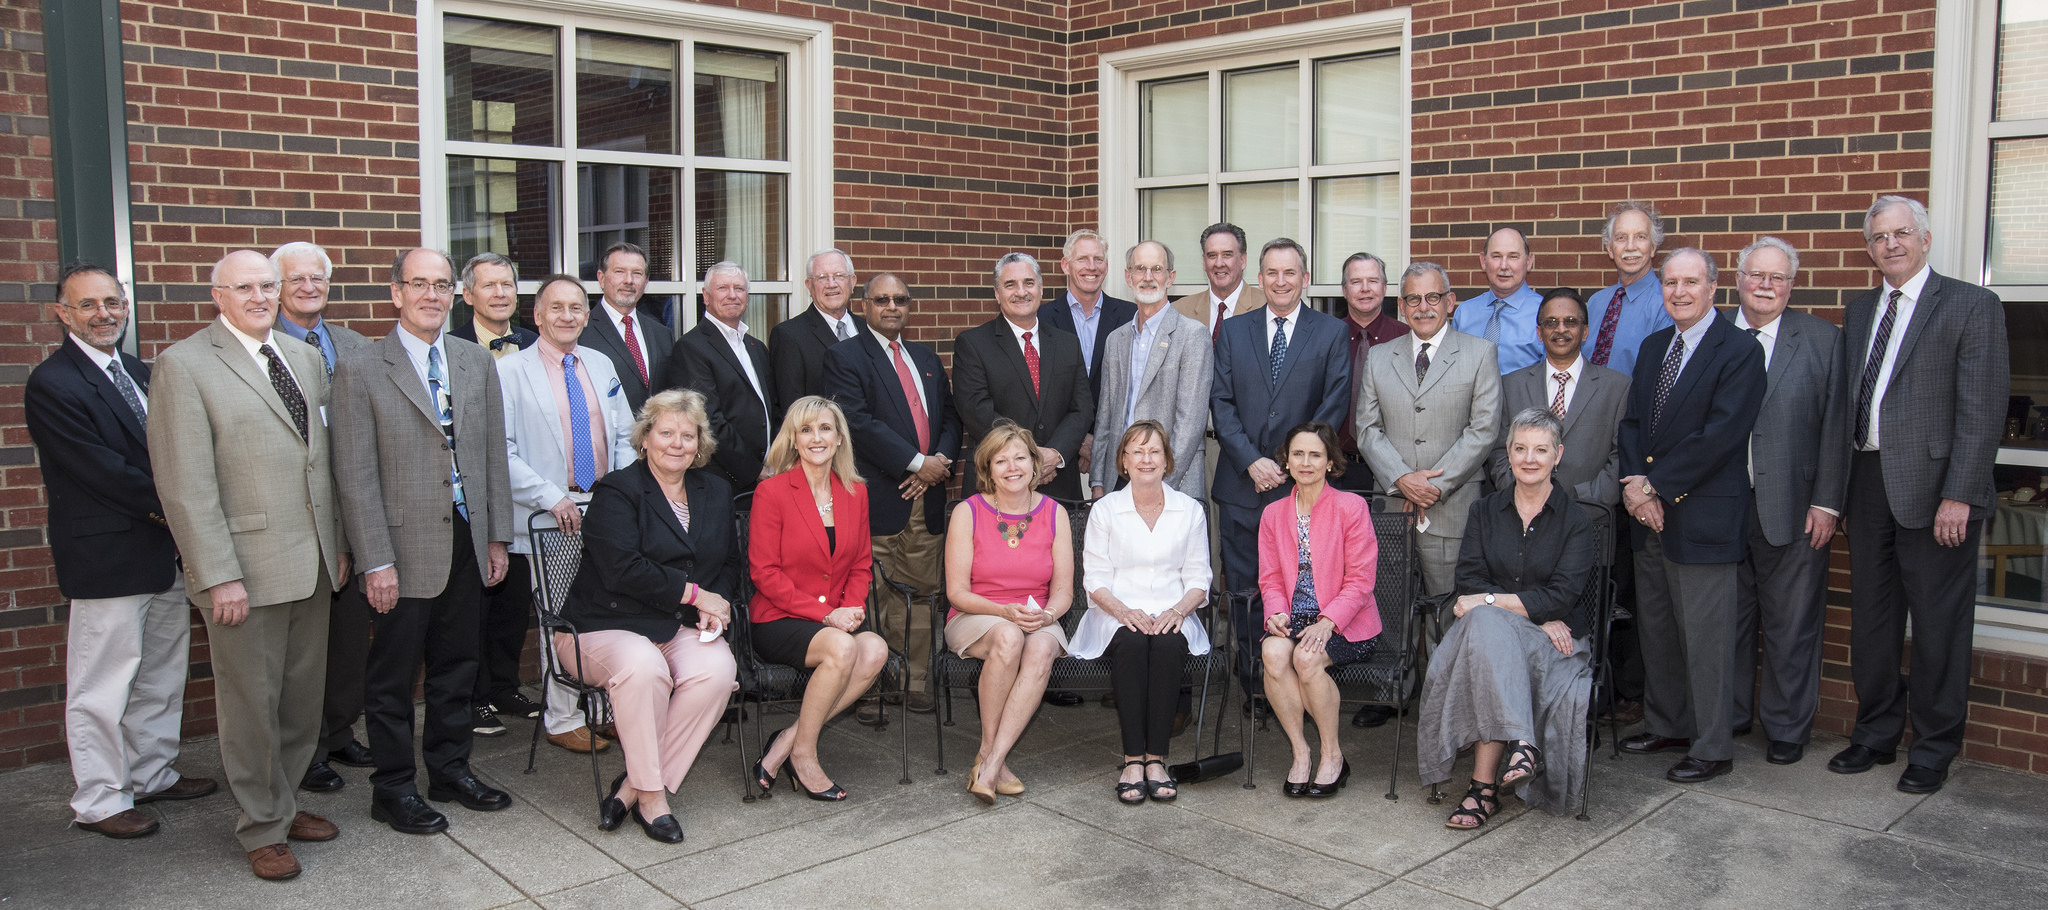 UofL faculty members were recognized for their years of service at the annual Celebration of Faculty Service Awards.